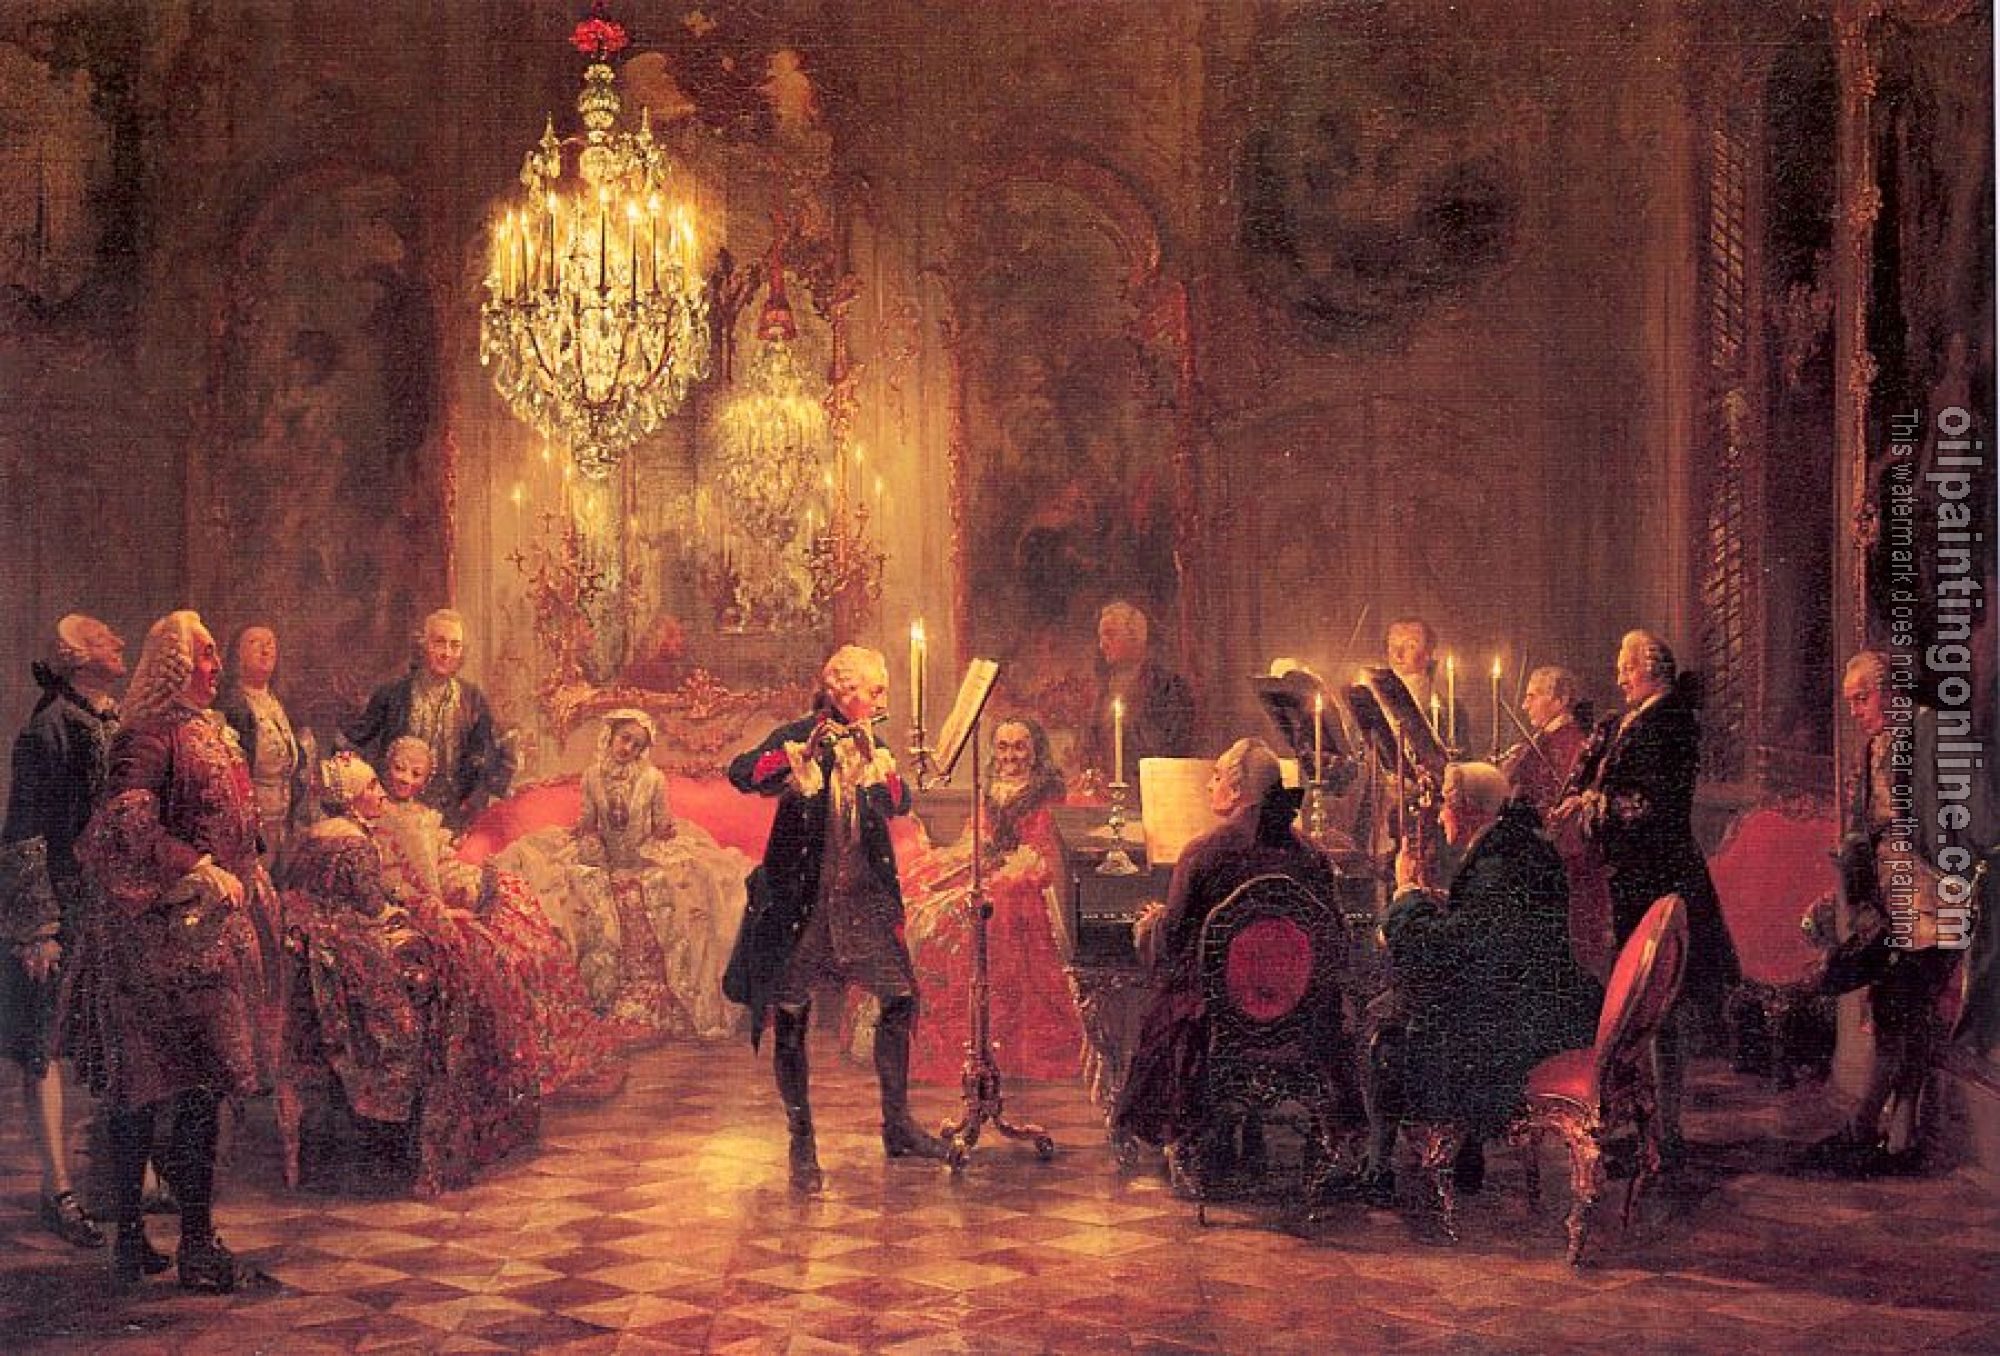 Menzel, Adolph von - A Flute Concert of Frederick the Great at Sanssouci